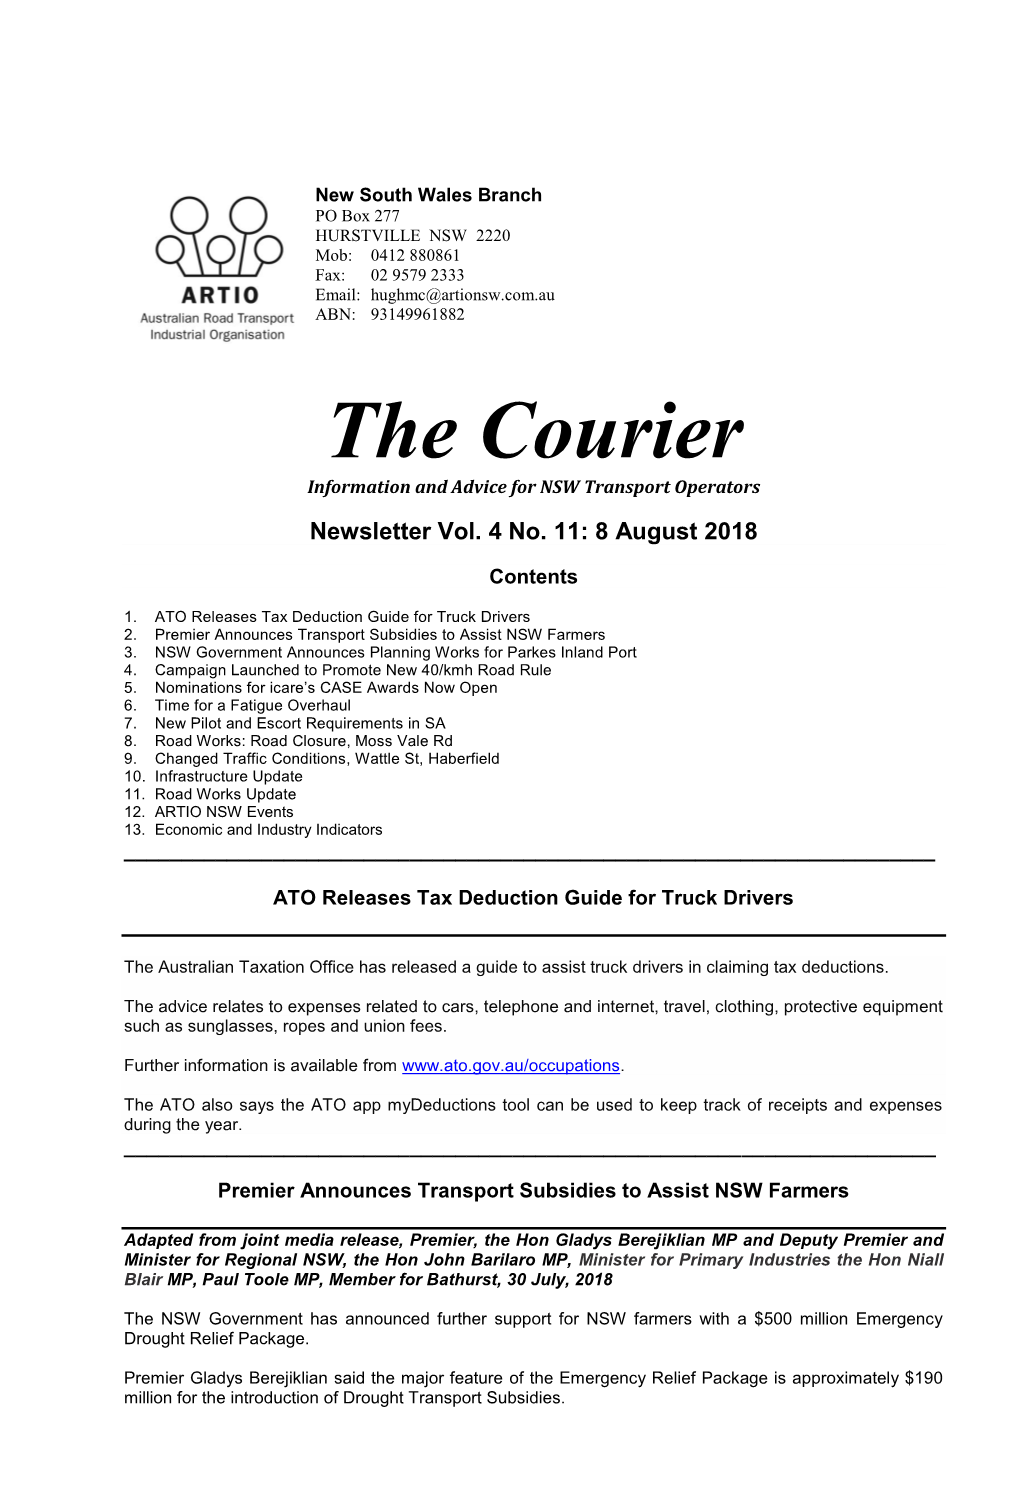 The Courier Information and Advice for NSW Transport Operators